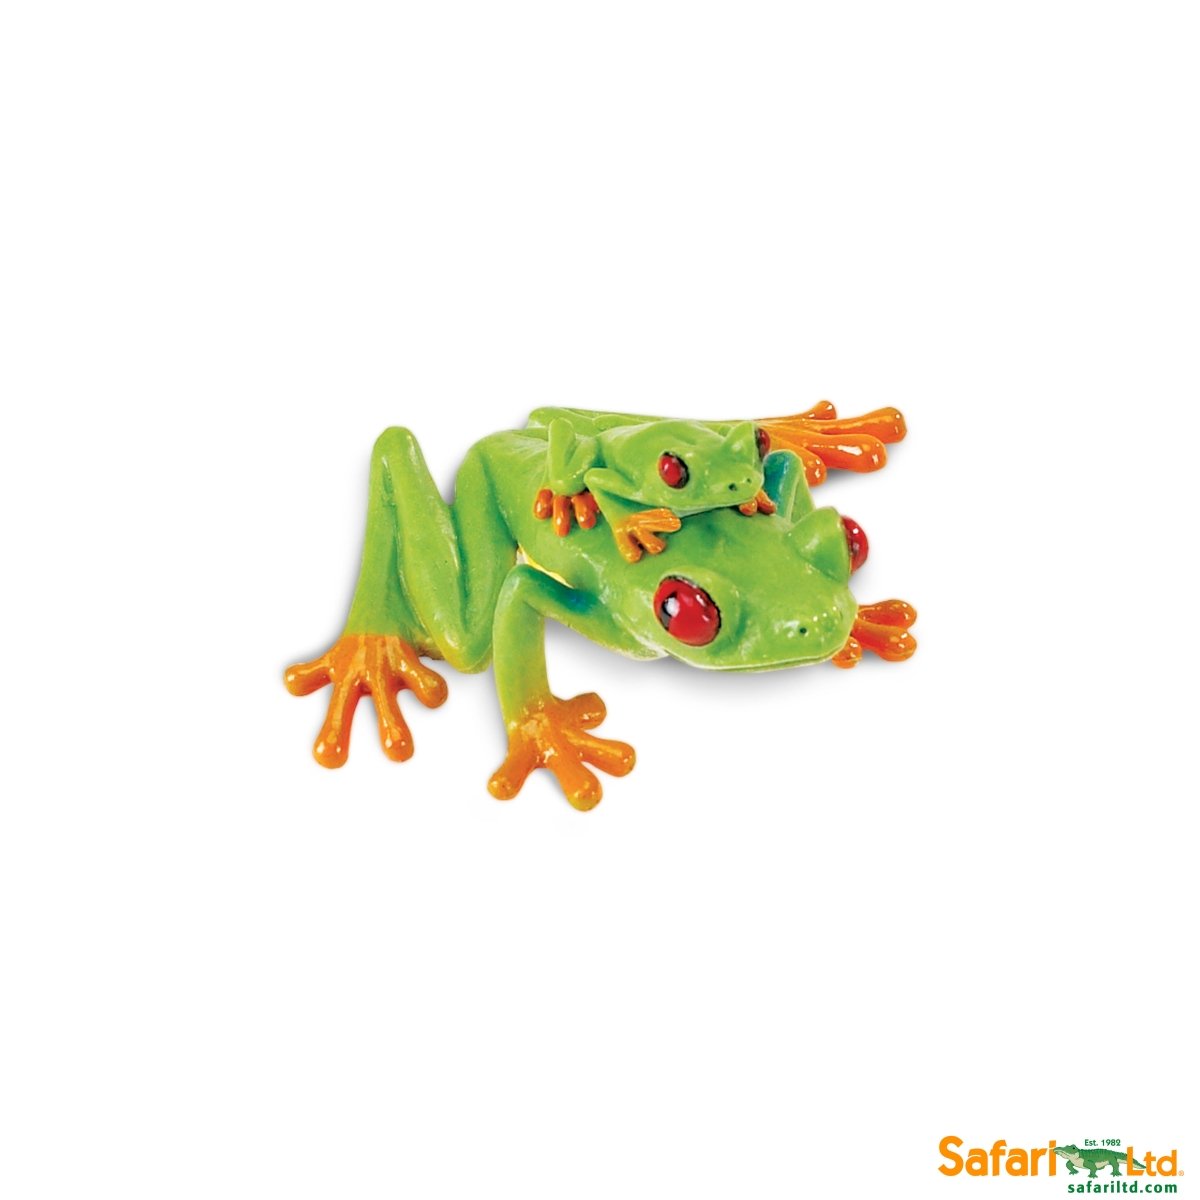 Picture of Safari 100120 Red-Eyed Tree Frog Figurine, Multi Color